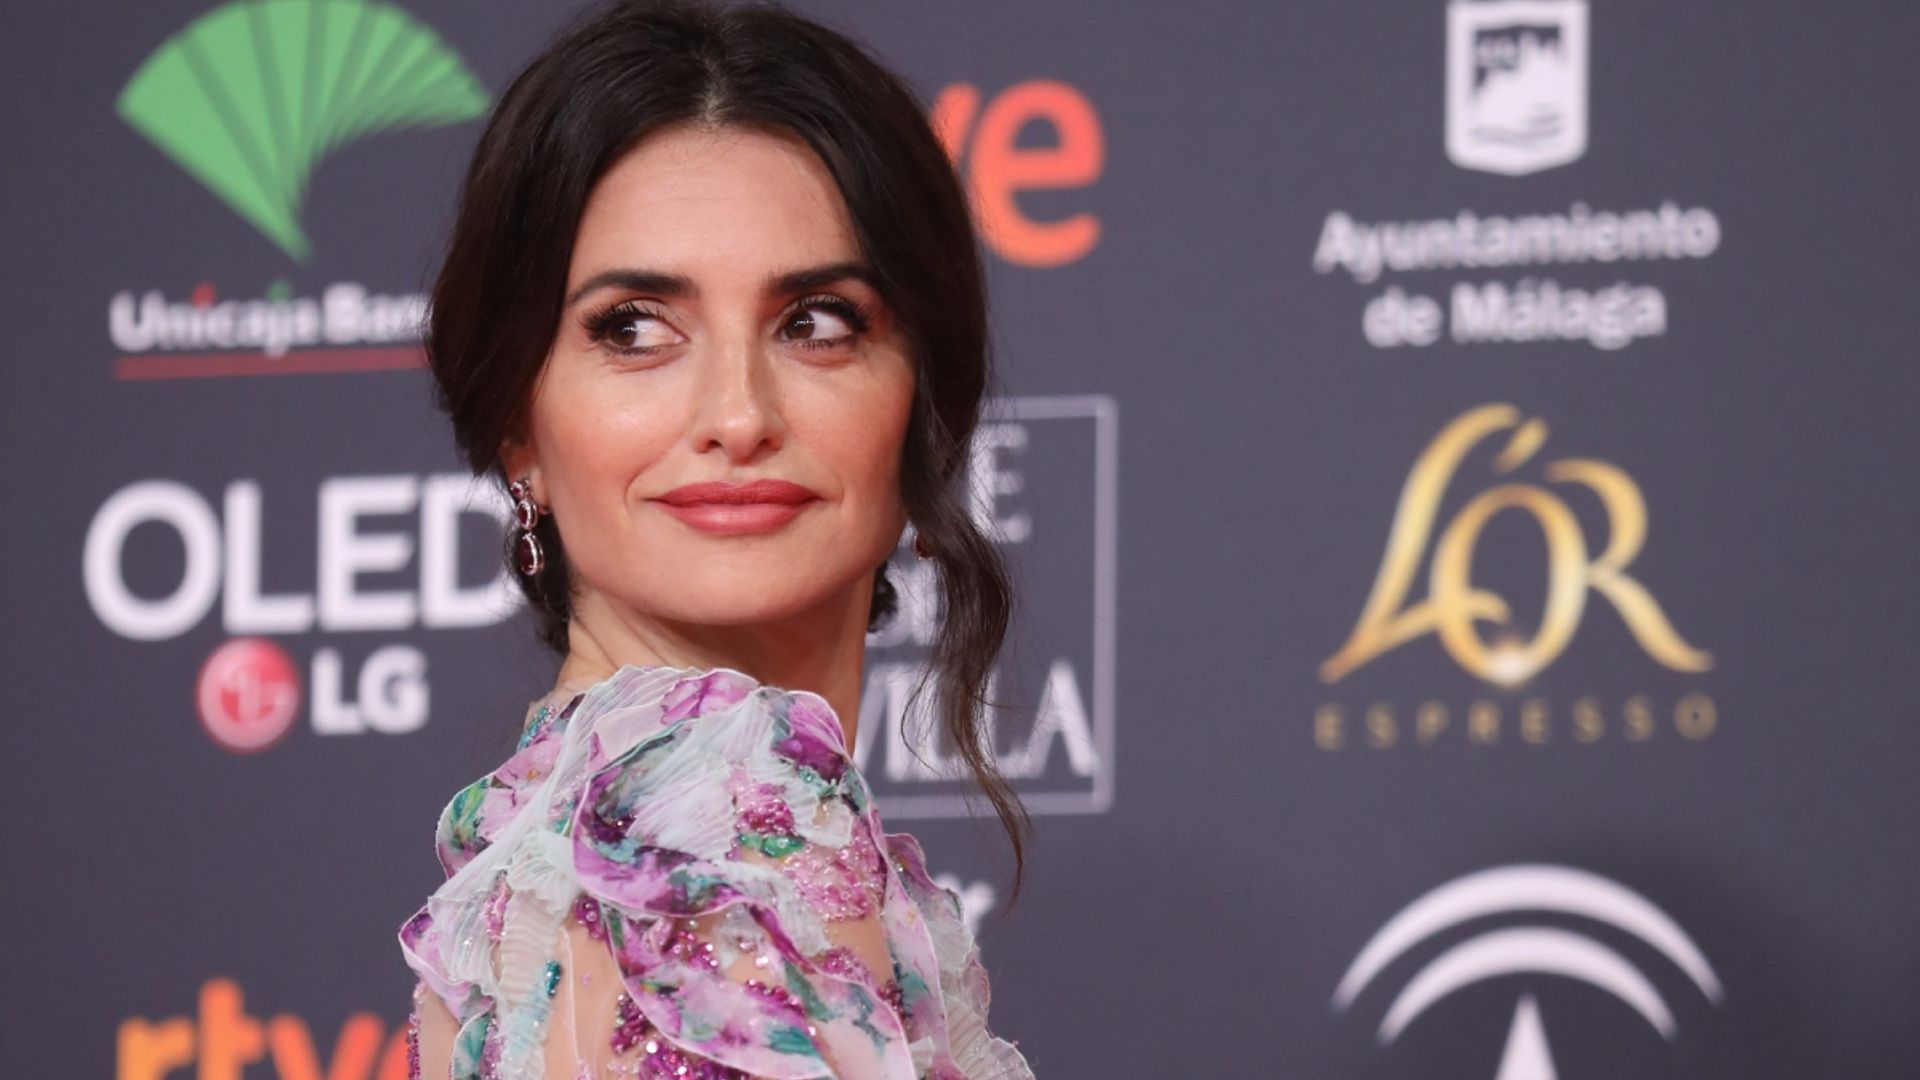 Penelope Cruz debuts an exciting new look with wildly different hairstyle